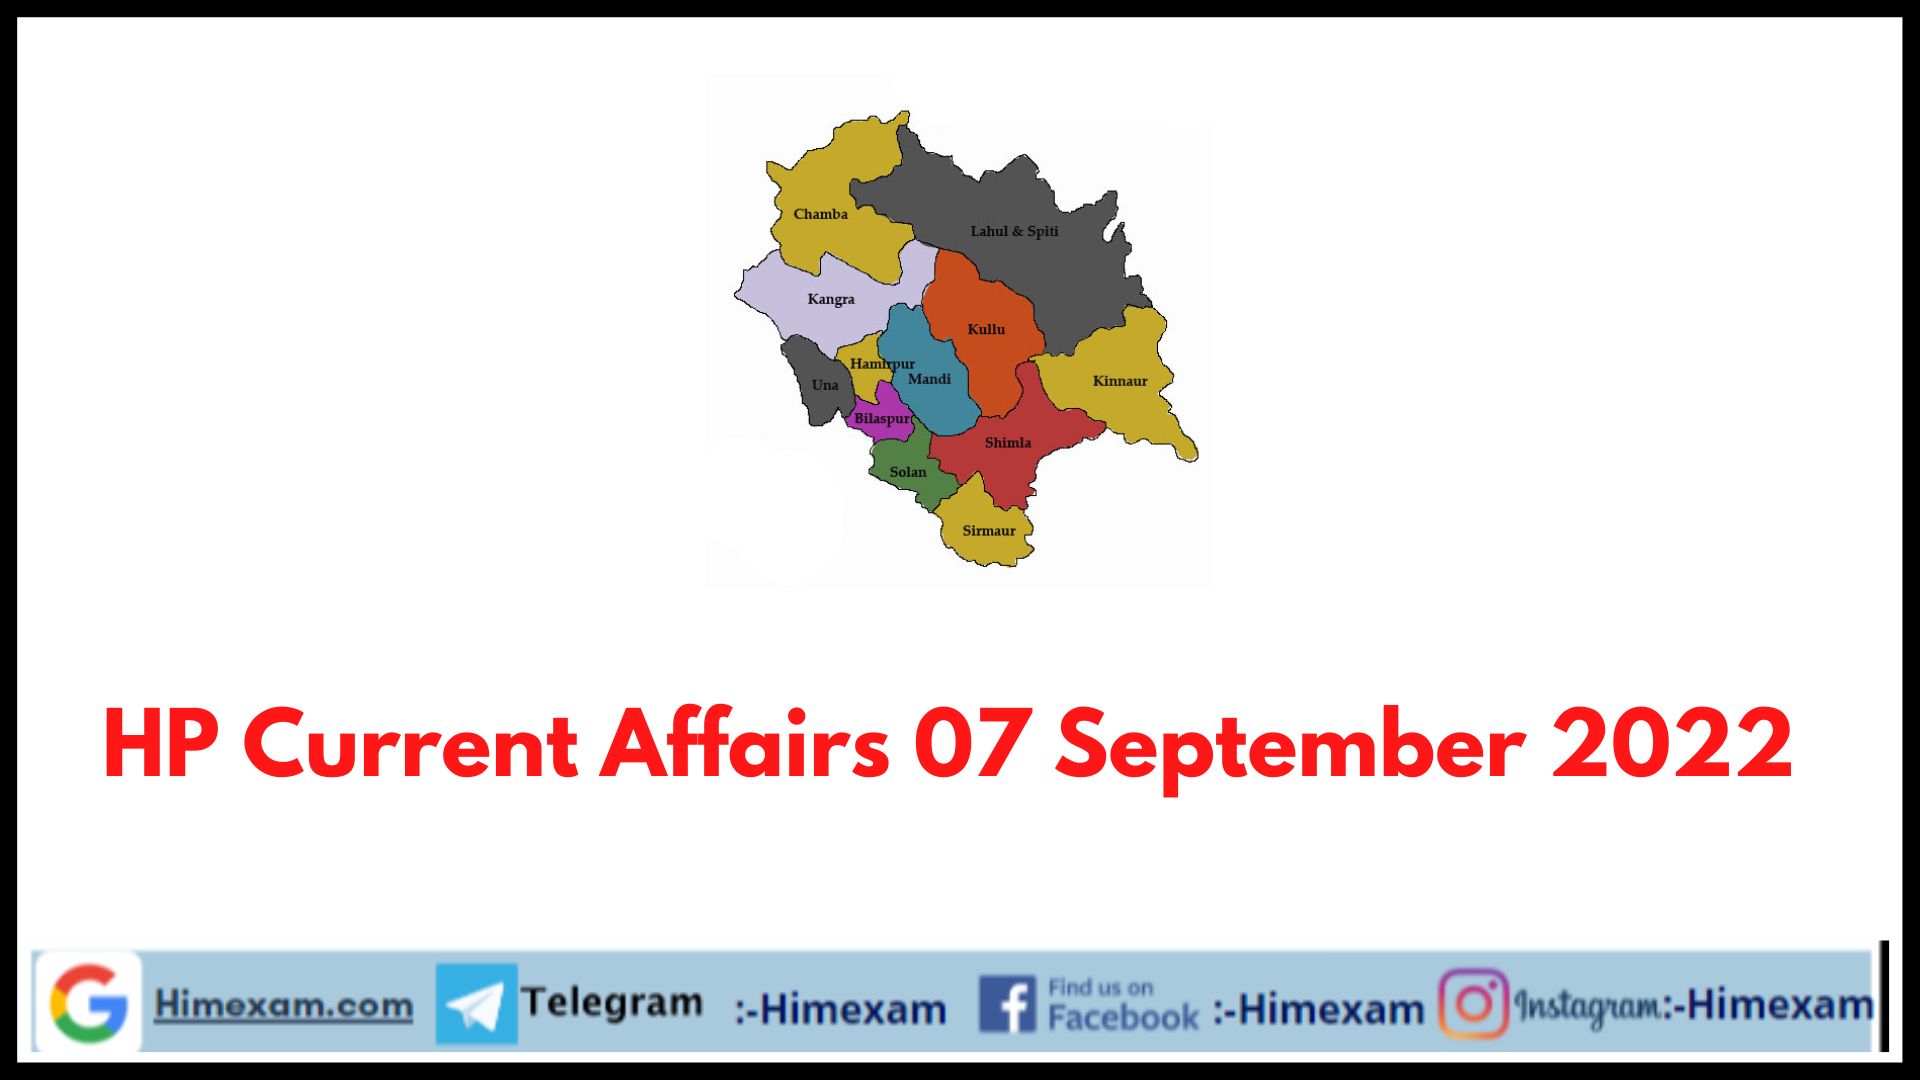 HP Current Affairs 07 September 2022